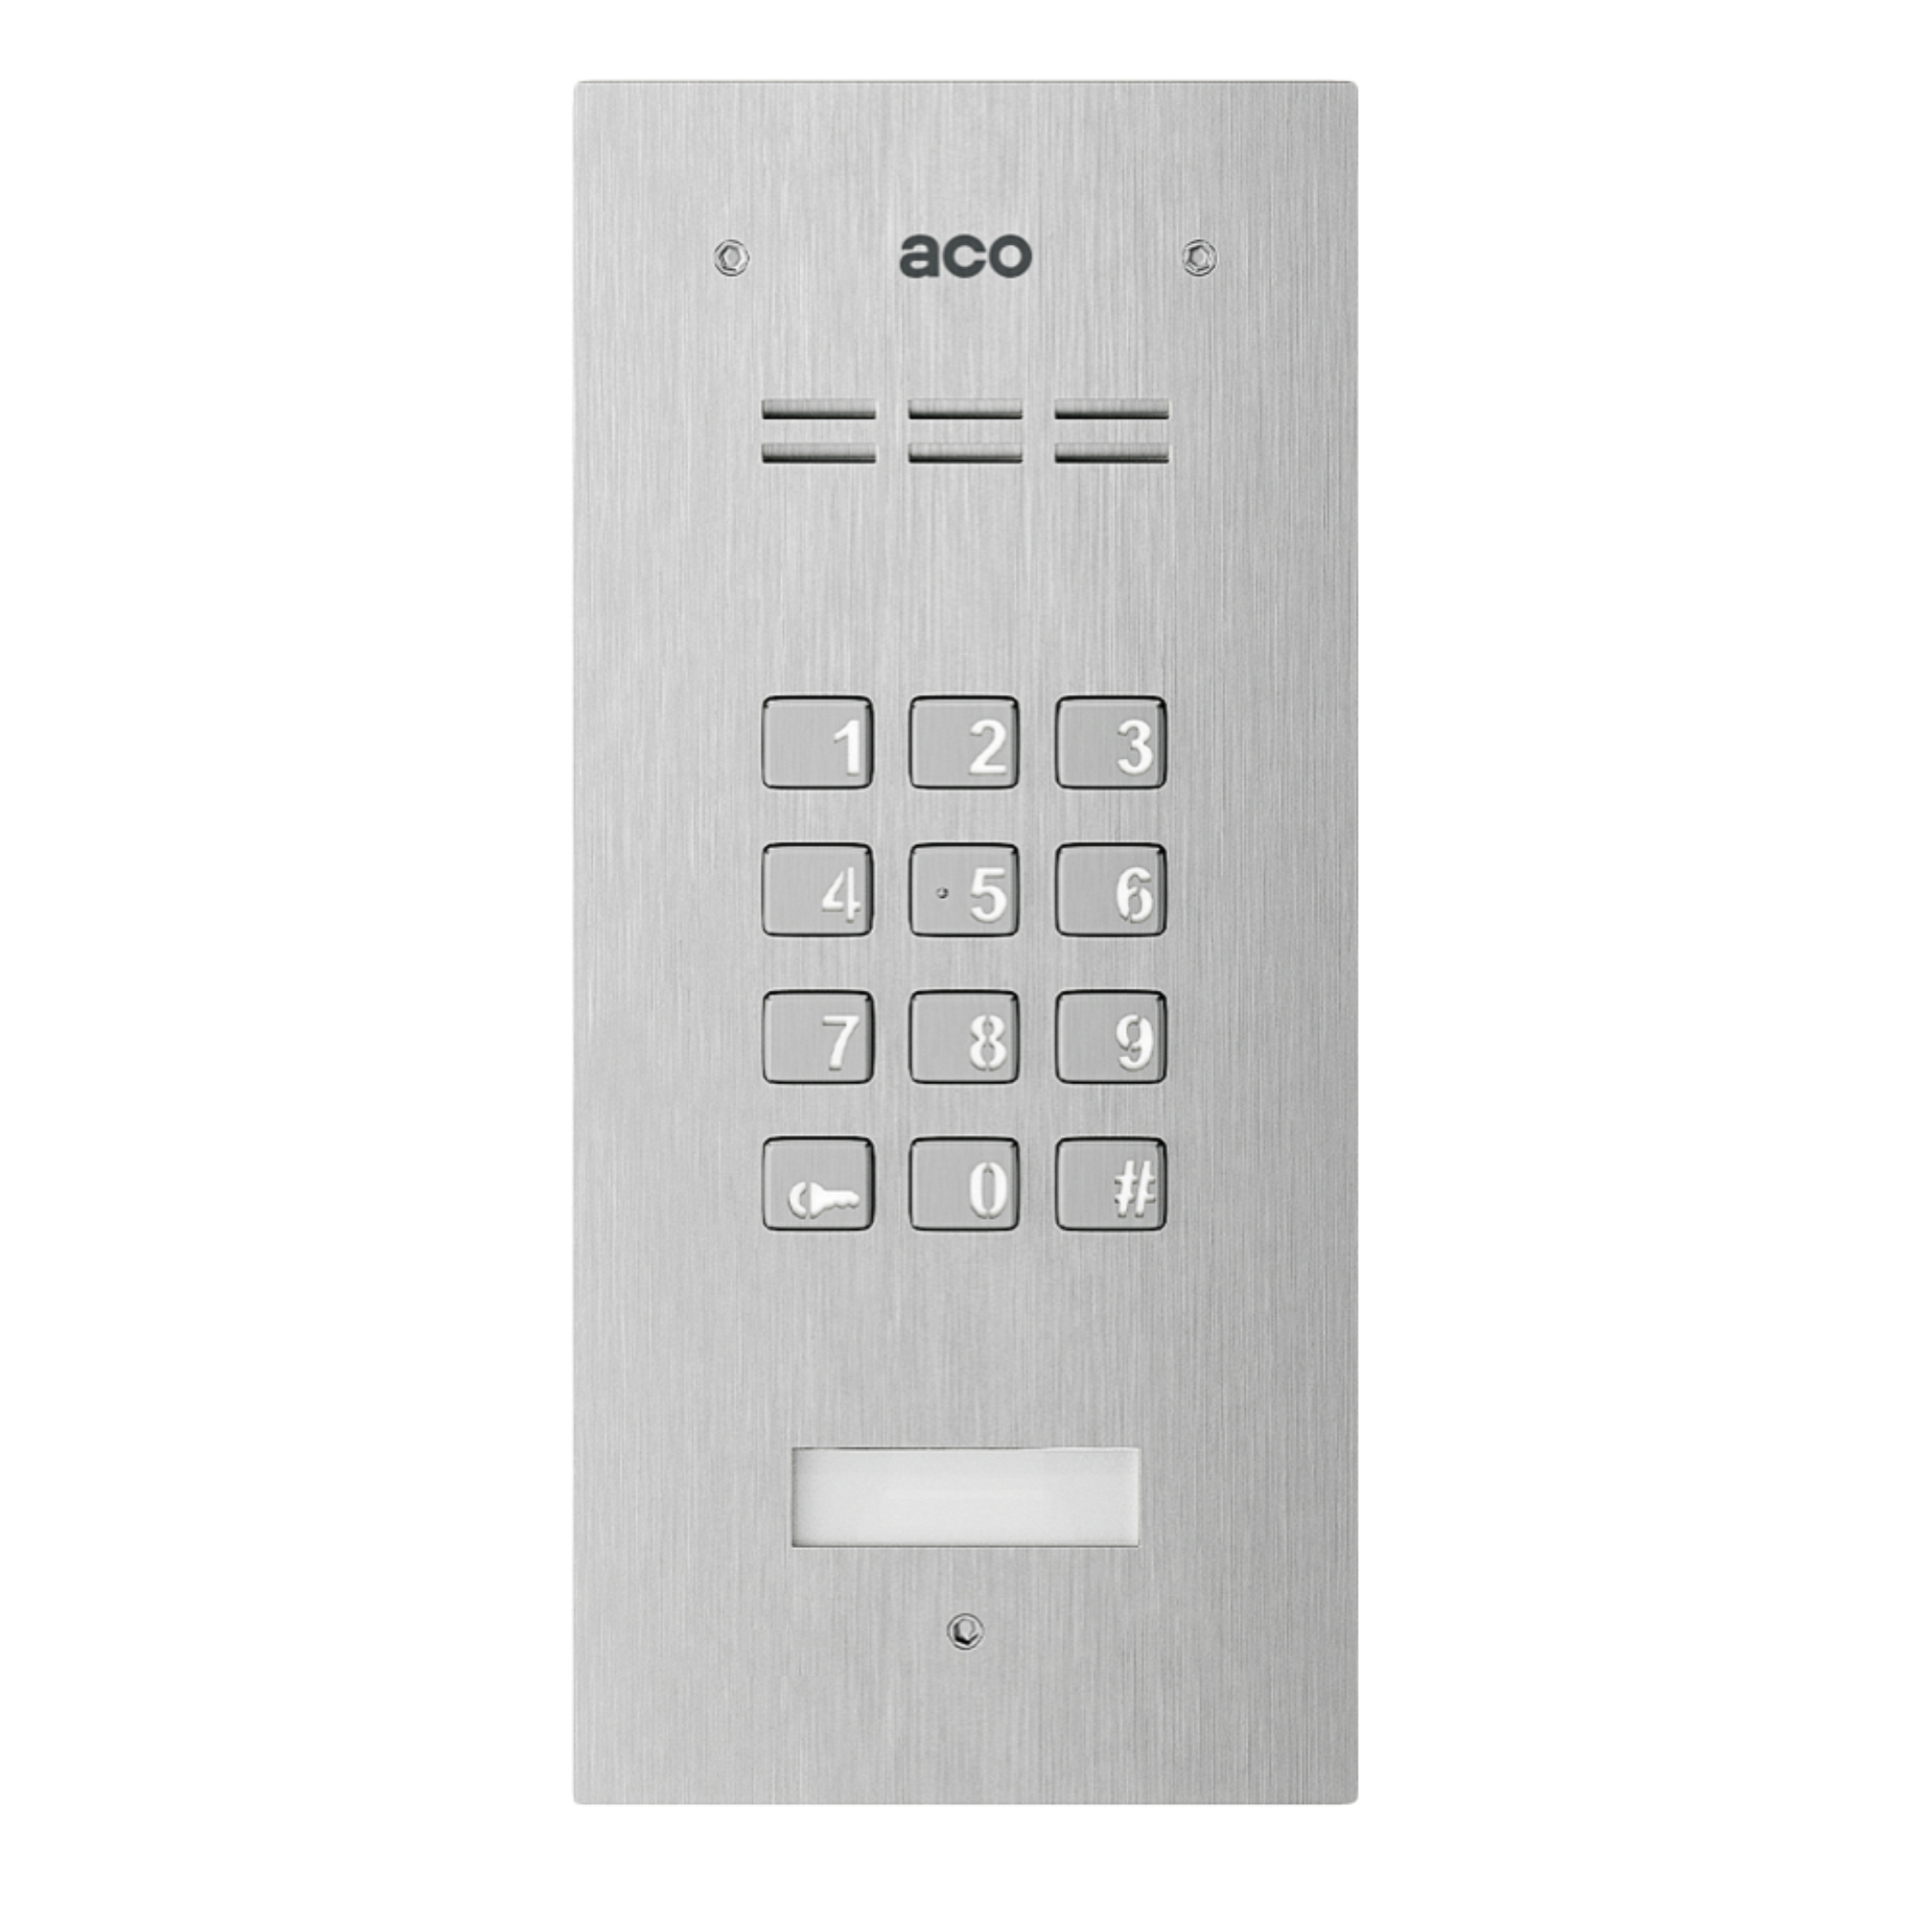 FAM-P-ZSACC Digital door entry panel with key fob reader and code lock